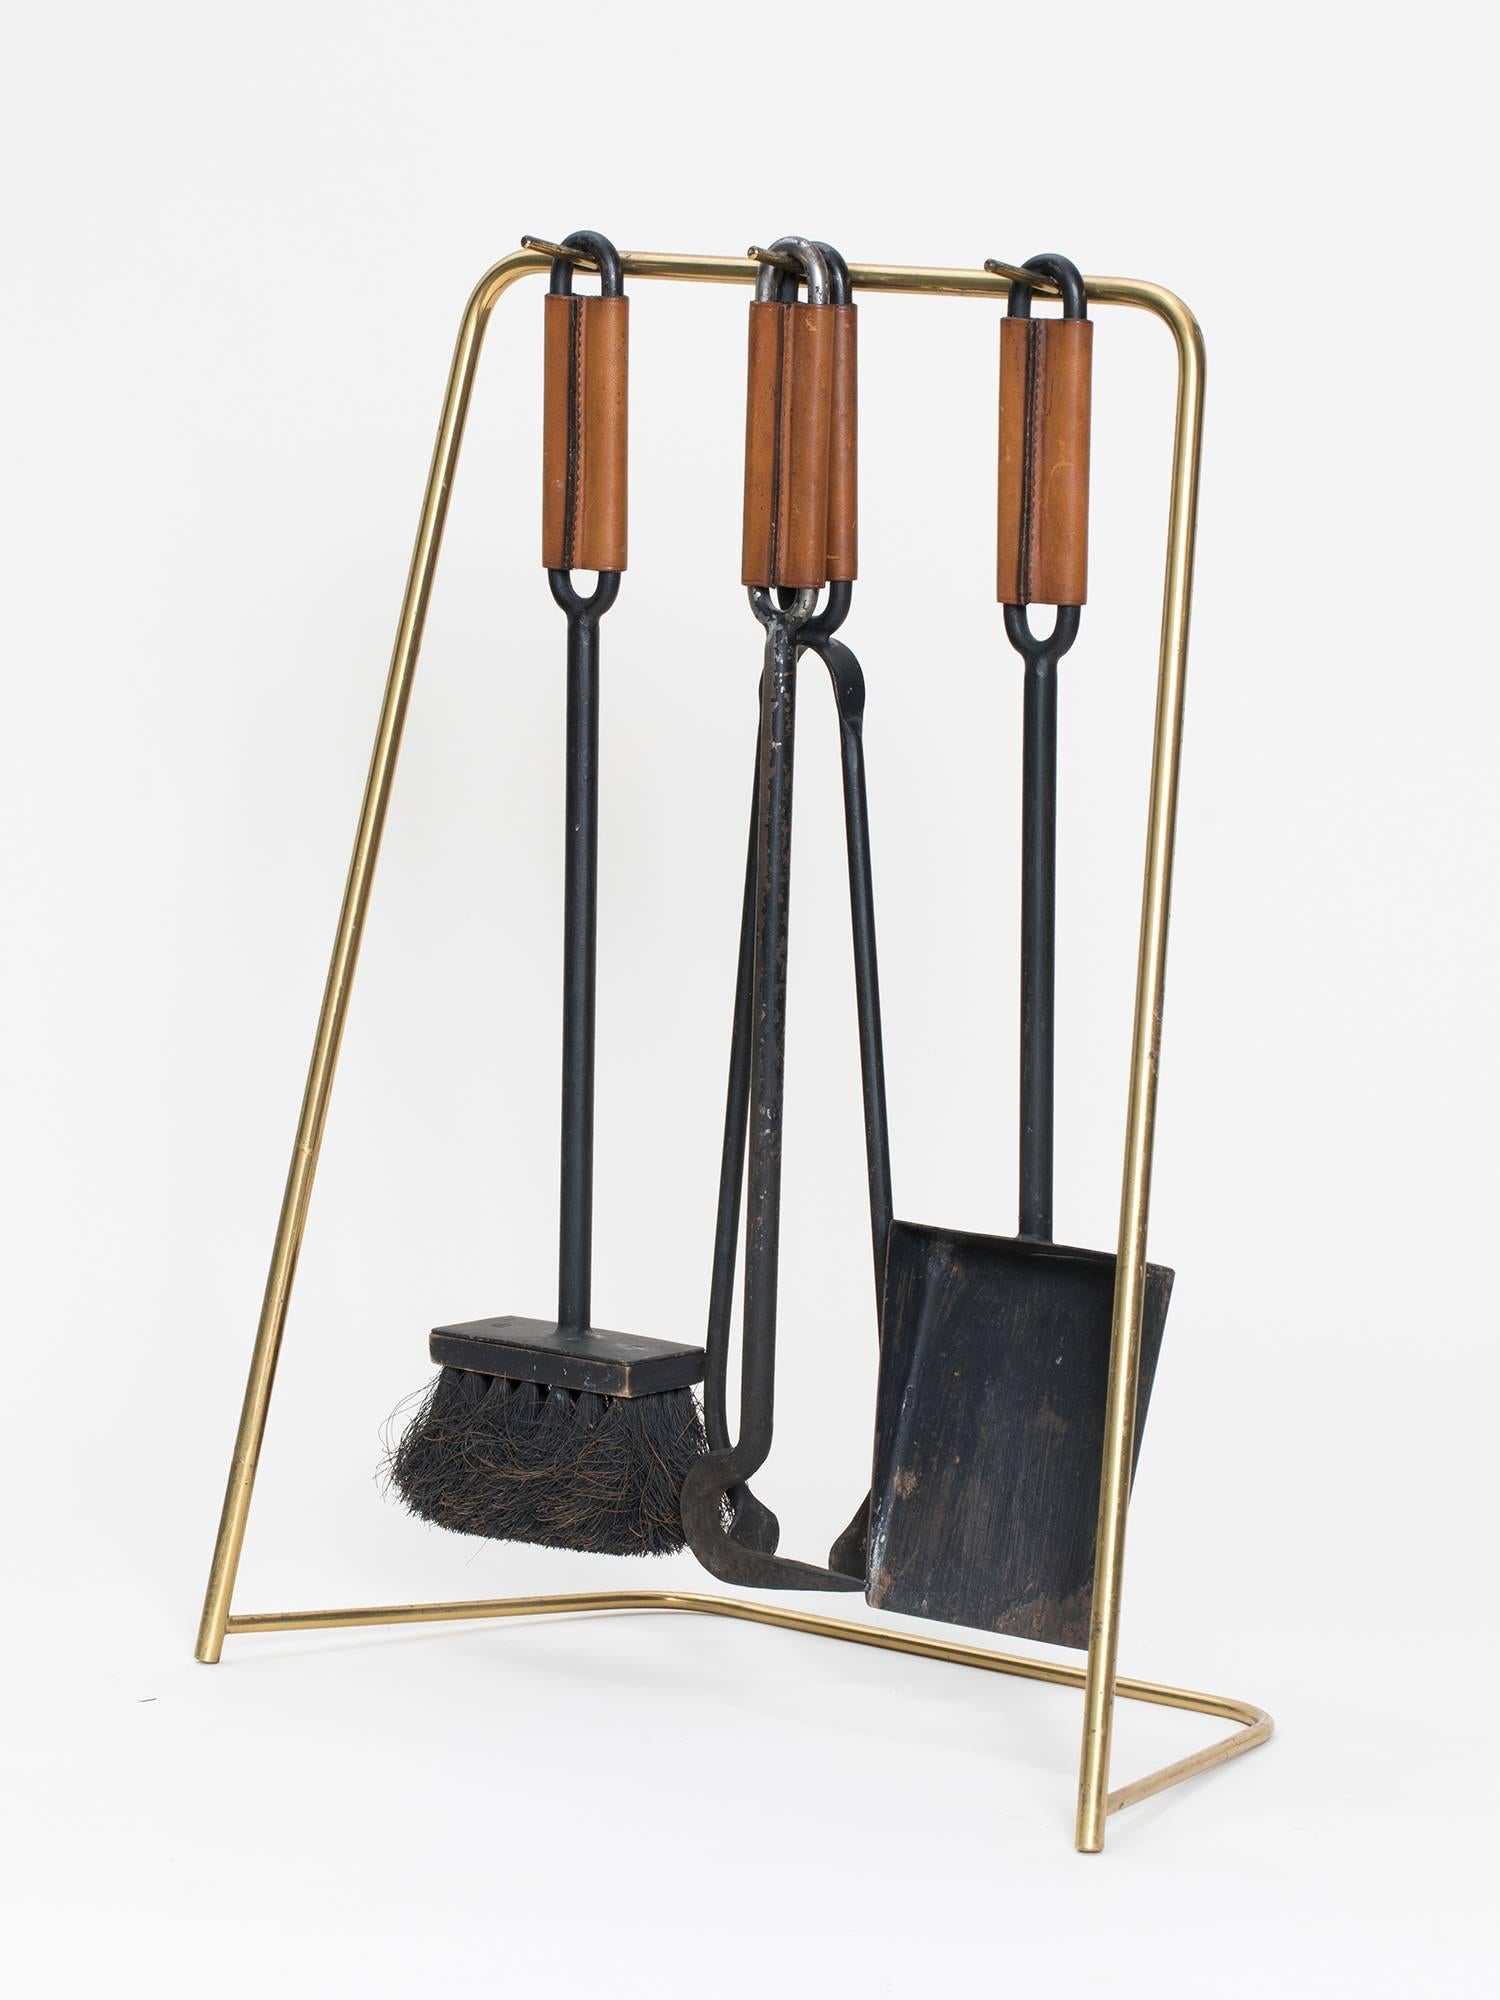 Iron and leather fire tool set with brush, hook, log grabber, shovel and brass stand by Viennese designer Carl Auböck. This is an original work from the 1950s.